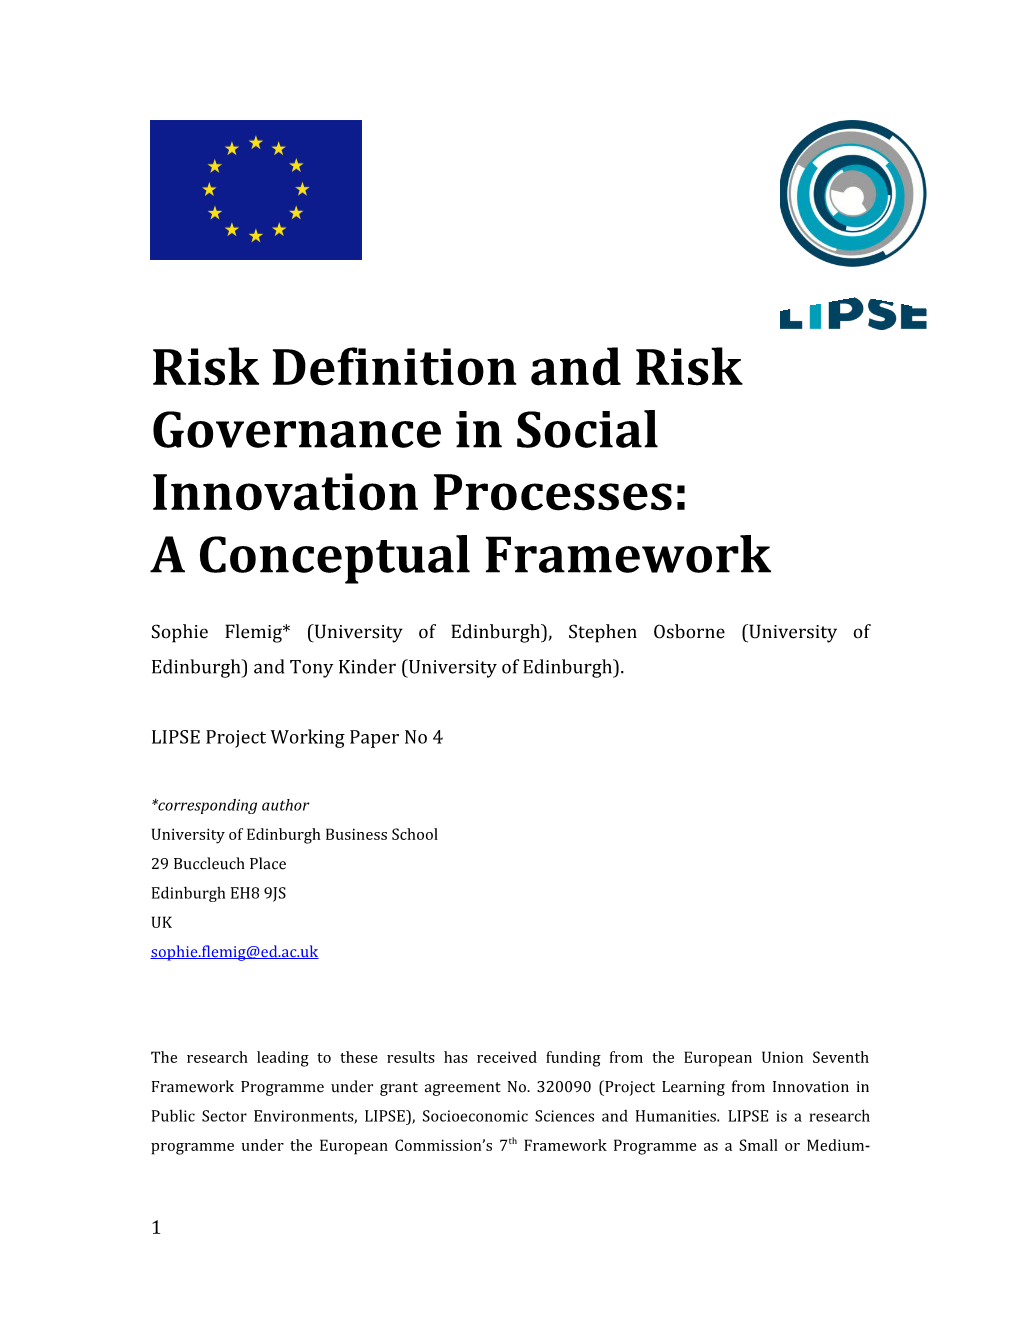 Risk Definition and Risk Governance in Social Innovation Processes: a Conceptual Framework